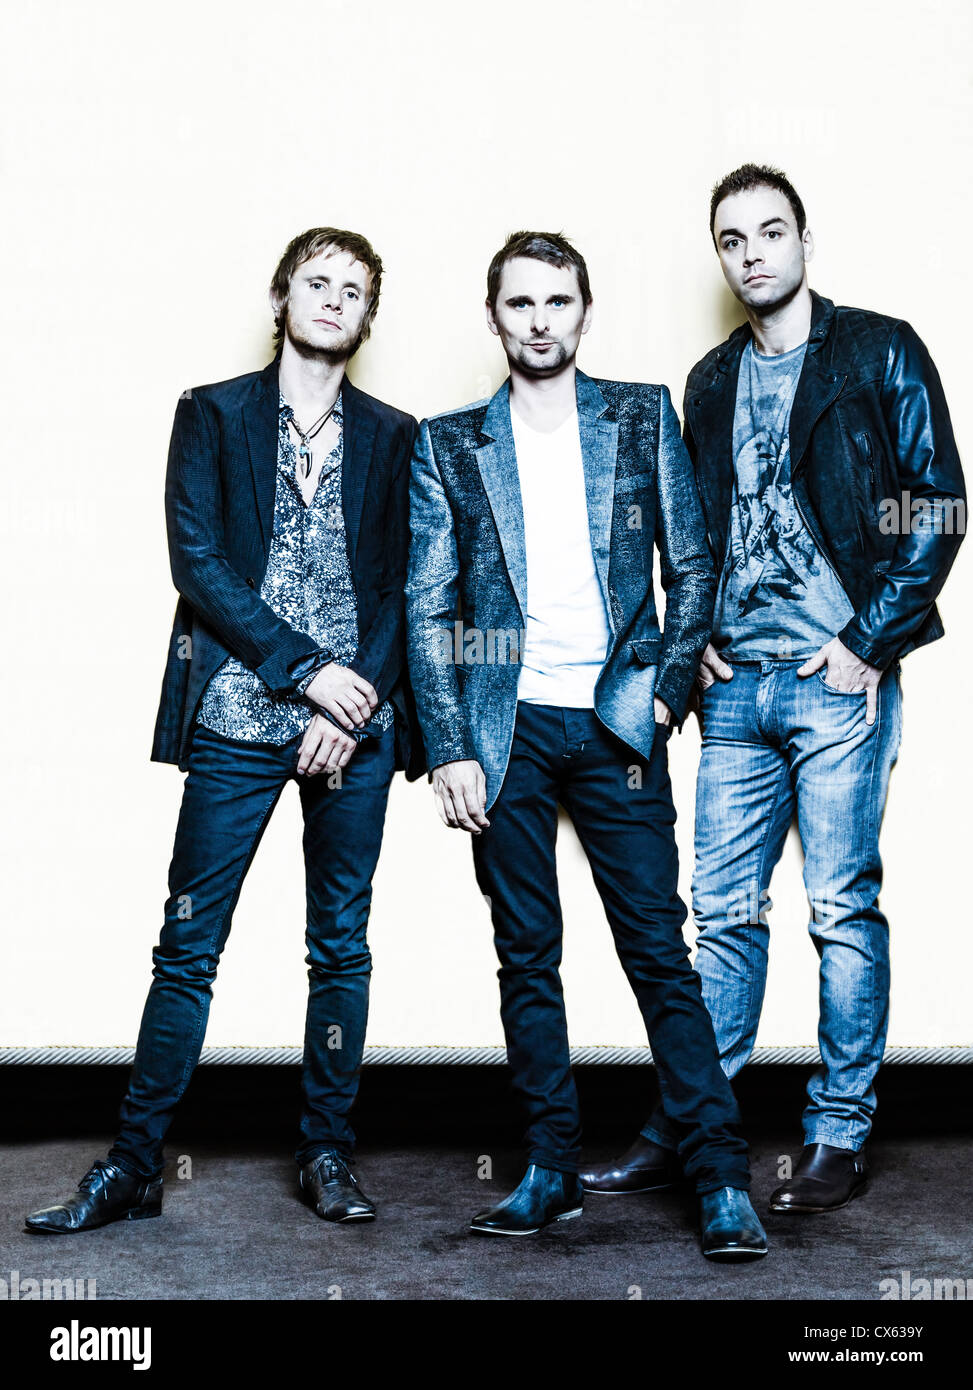 Paris, France - July 04, 2012: Portrait of the english rock group Muse with Matthew Bellamy, Dominic Howard and Christopher Wolstenholme at Paris, France on july 4th, 2012 Stock Photo